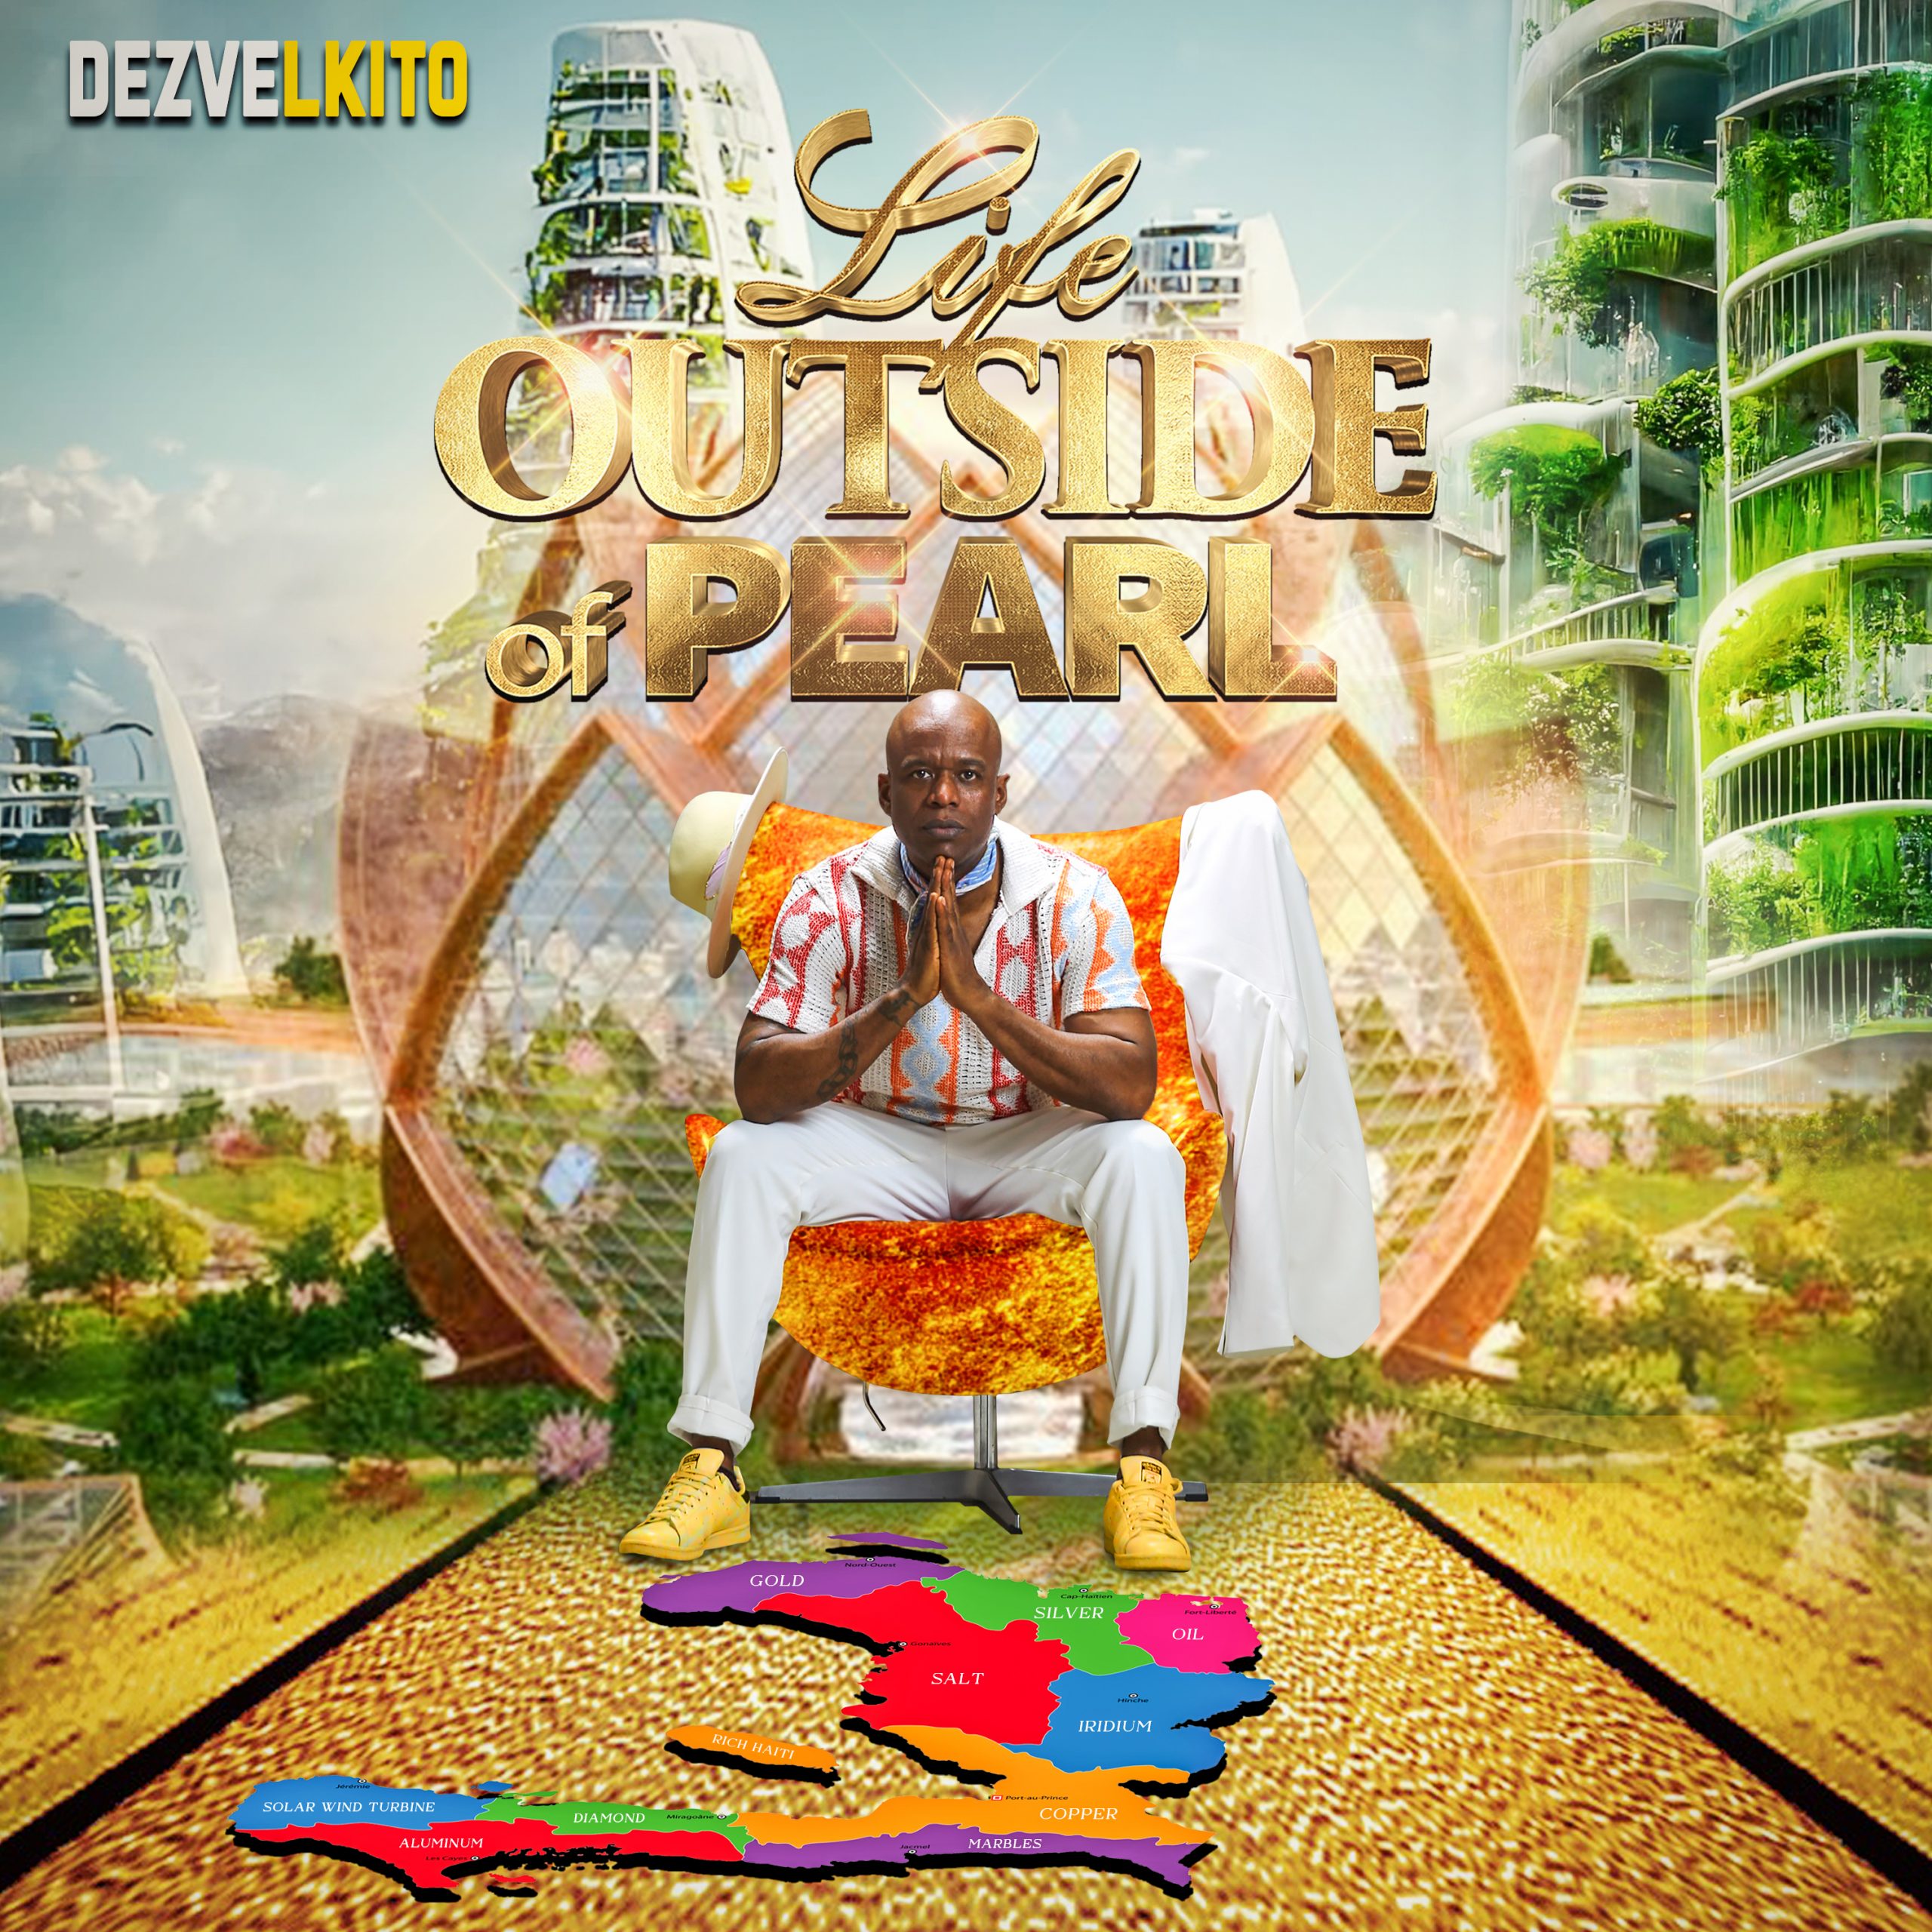 Irresistible Musical Fusion: Dezvelkito’s “Life Outside of Pearl” on the playlist.